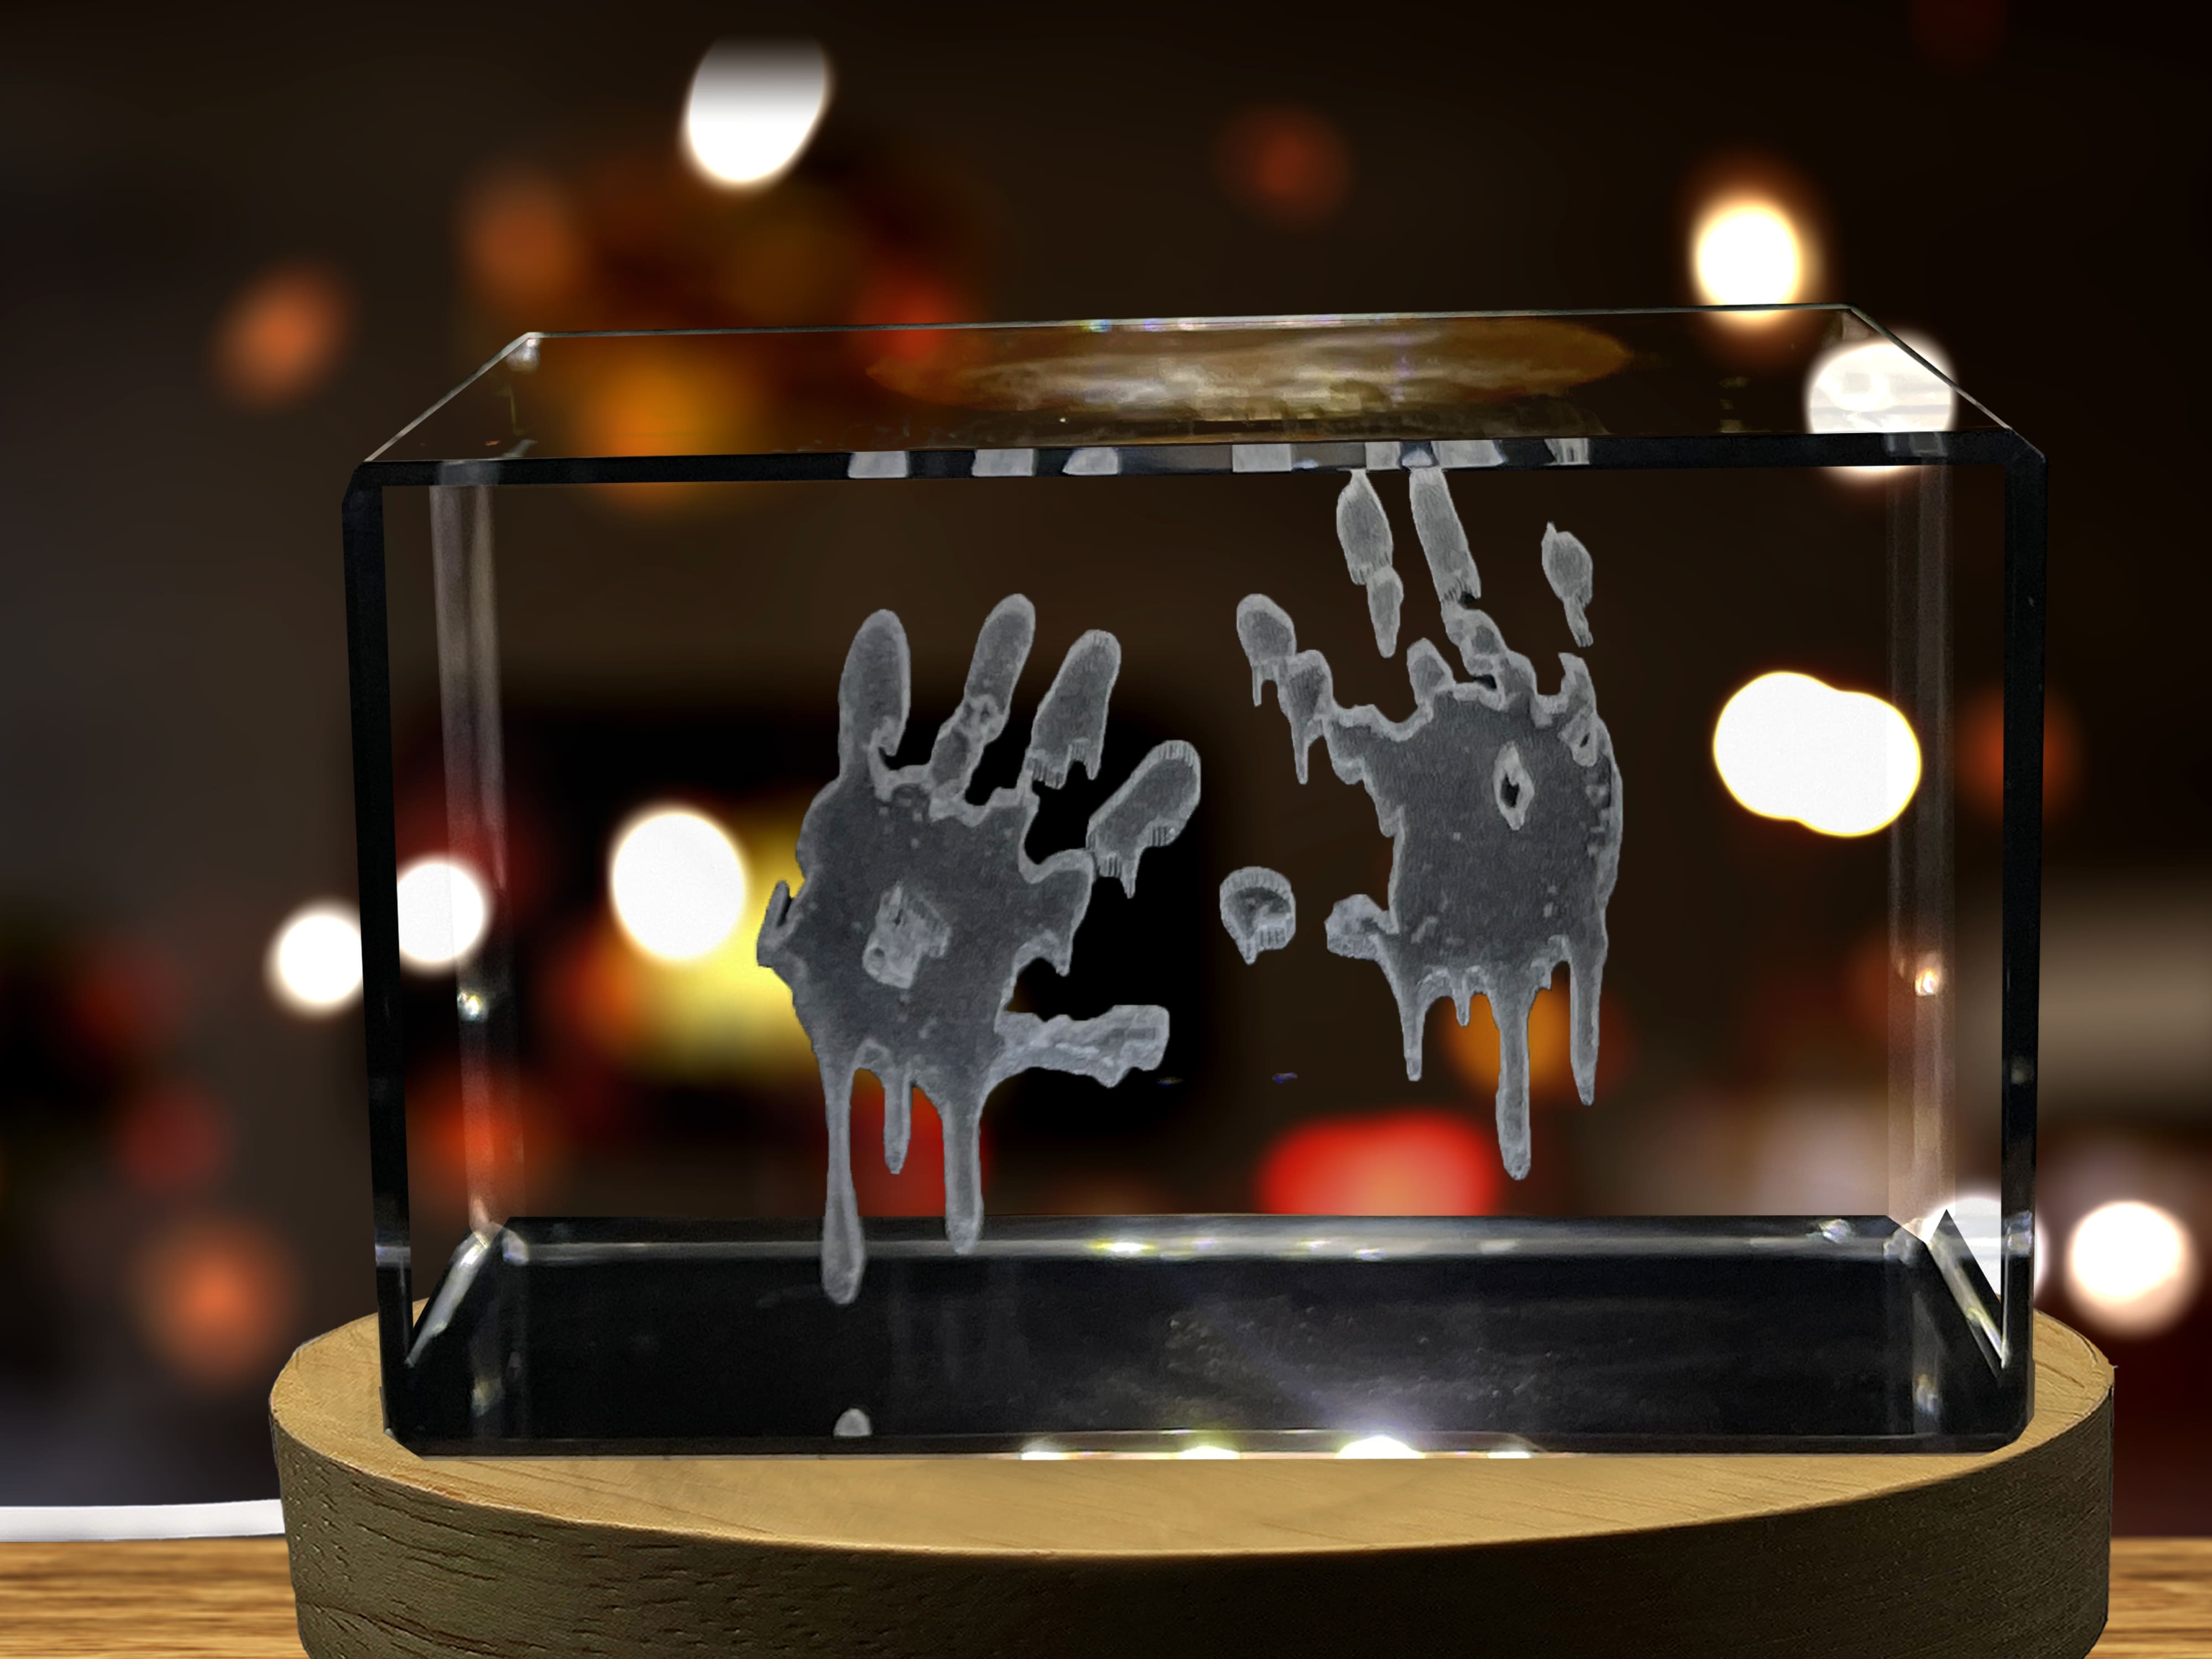 Blood Symbolism 3D Engraved Crystal Decor - Illuminated Halloween Home Decor A&B Crystal Collection